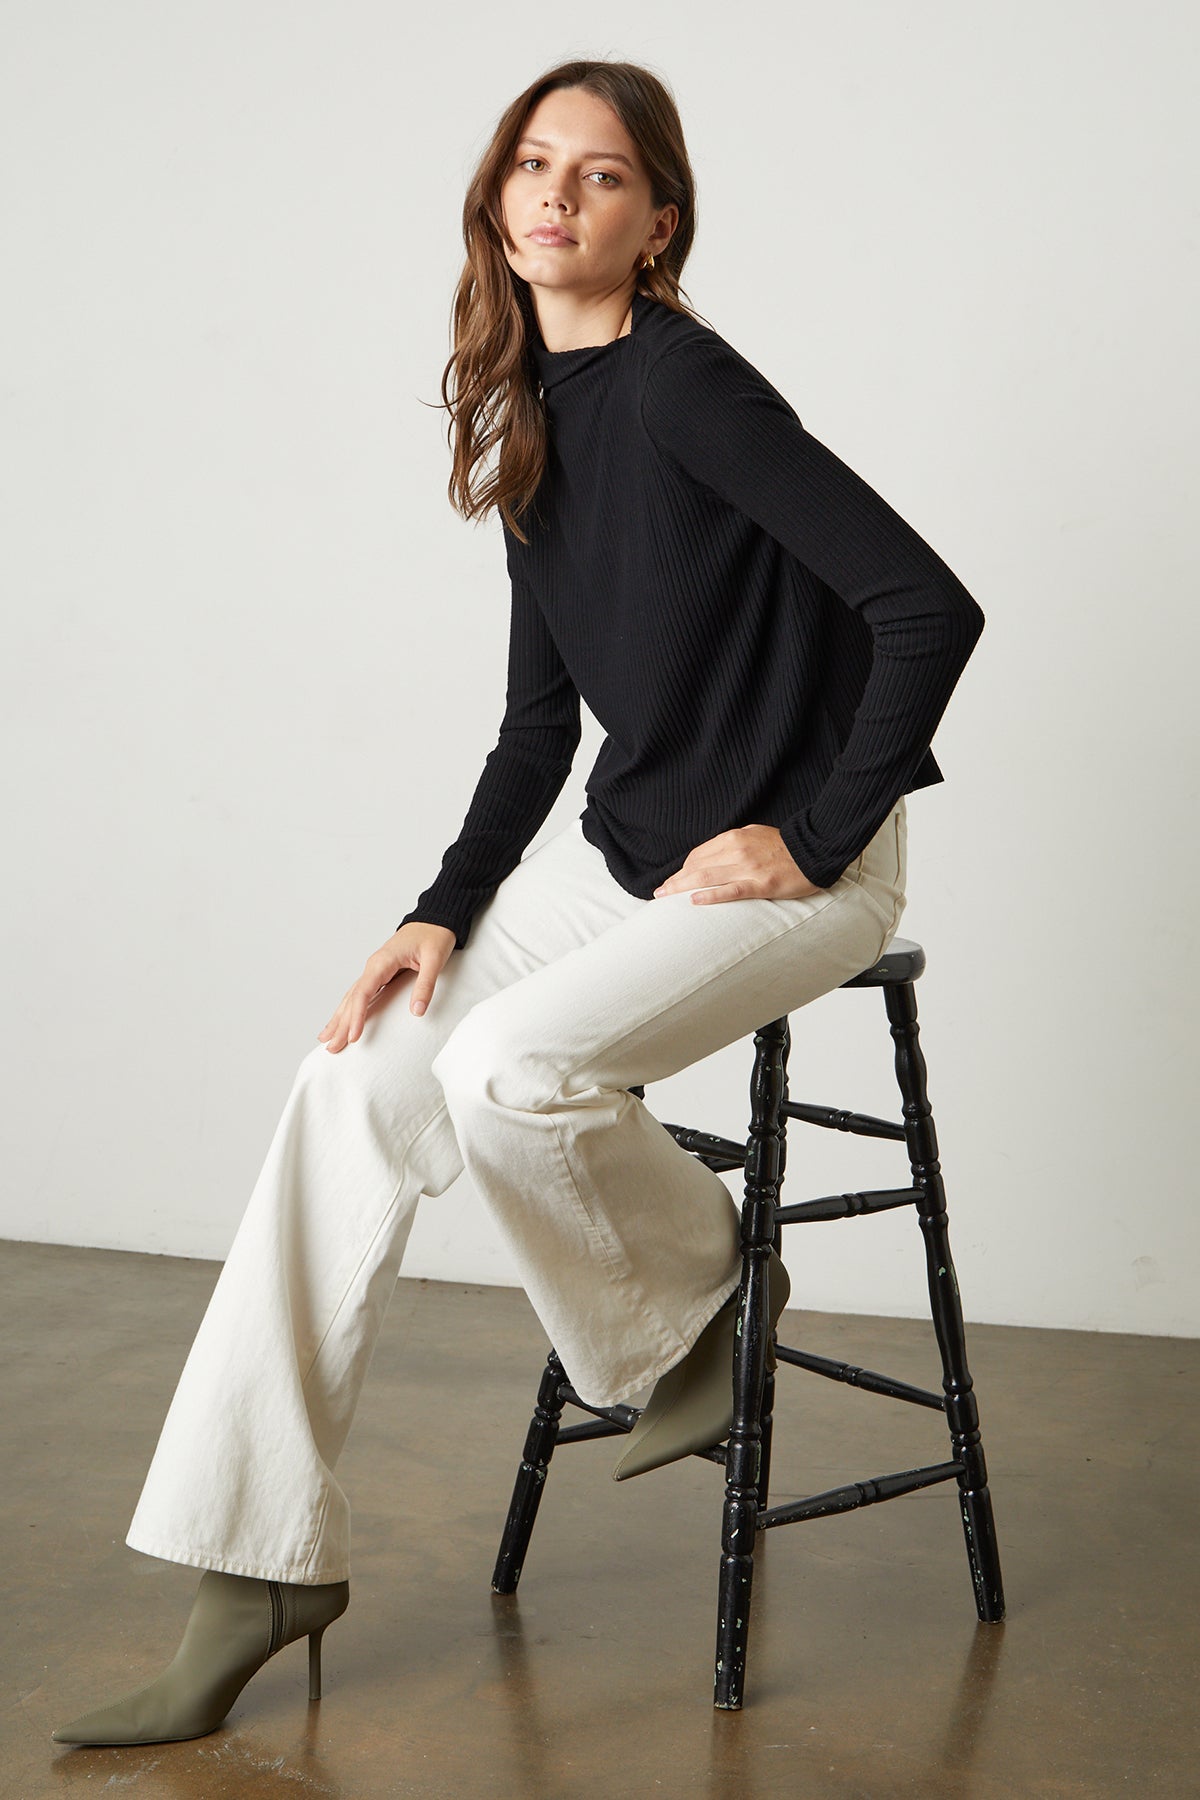 The model is sitting on a stool in a Velvet by Graham & Spencer DEANNA MOCK NECK TOP and white pants.-25698103656641